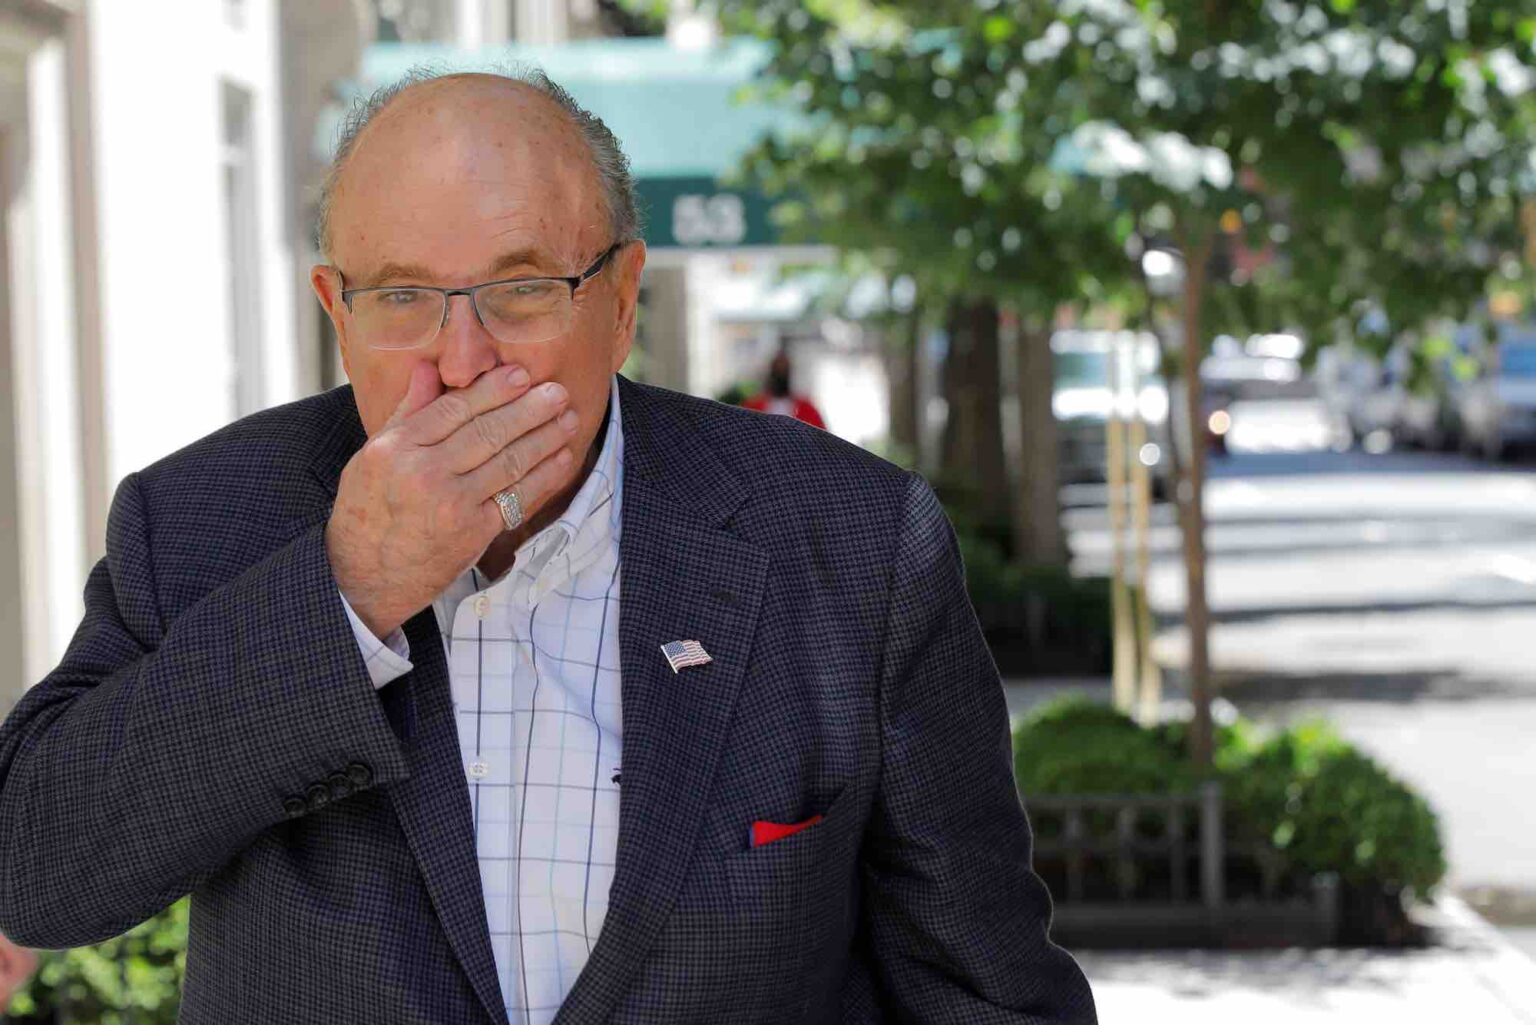 Rudy Giuliani has lost his license to practice law in New York state. Learn why he's sweating over this latest news.